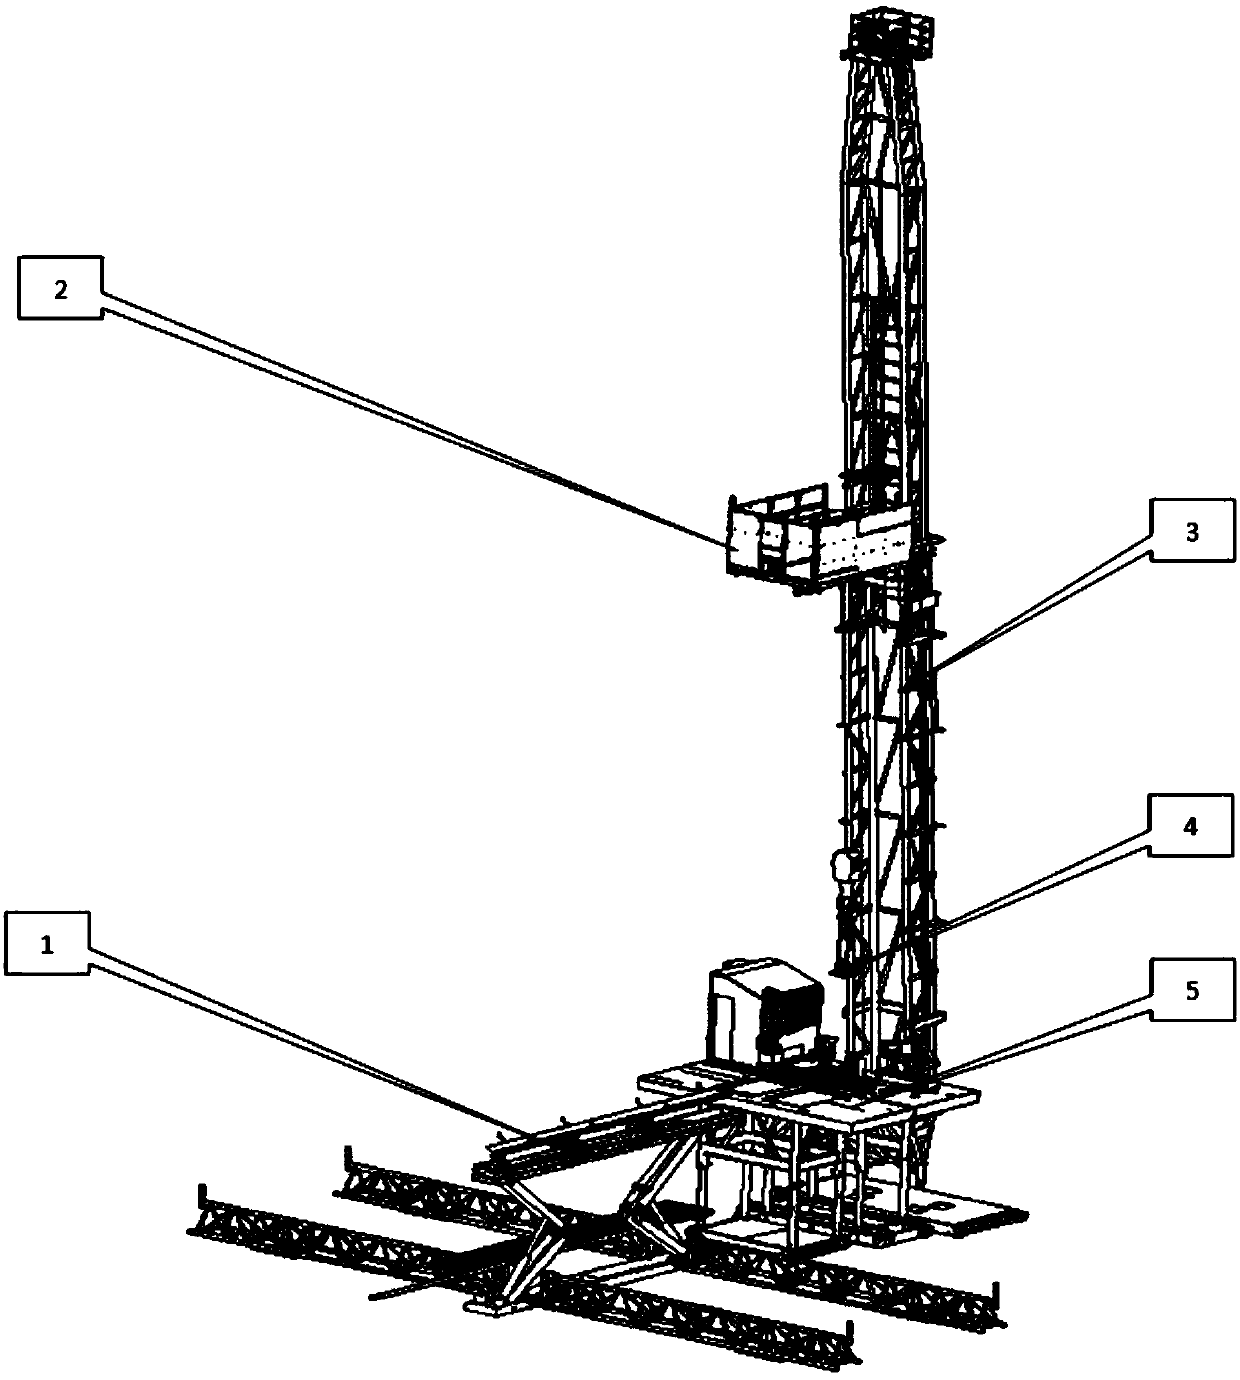 Automatic workover rig